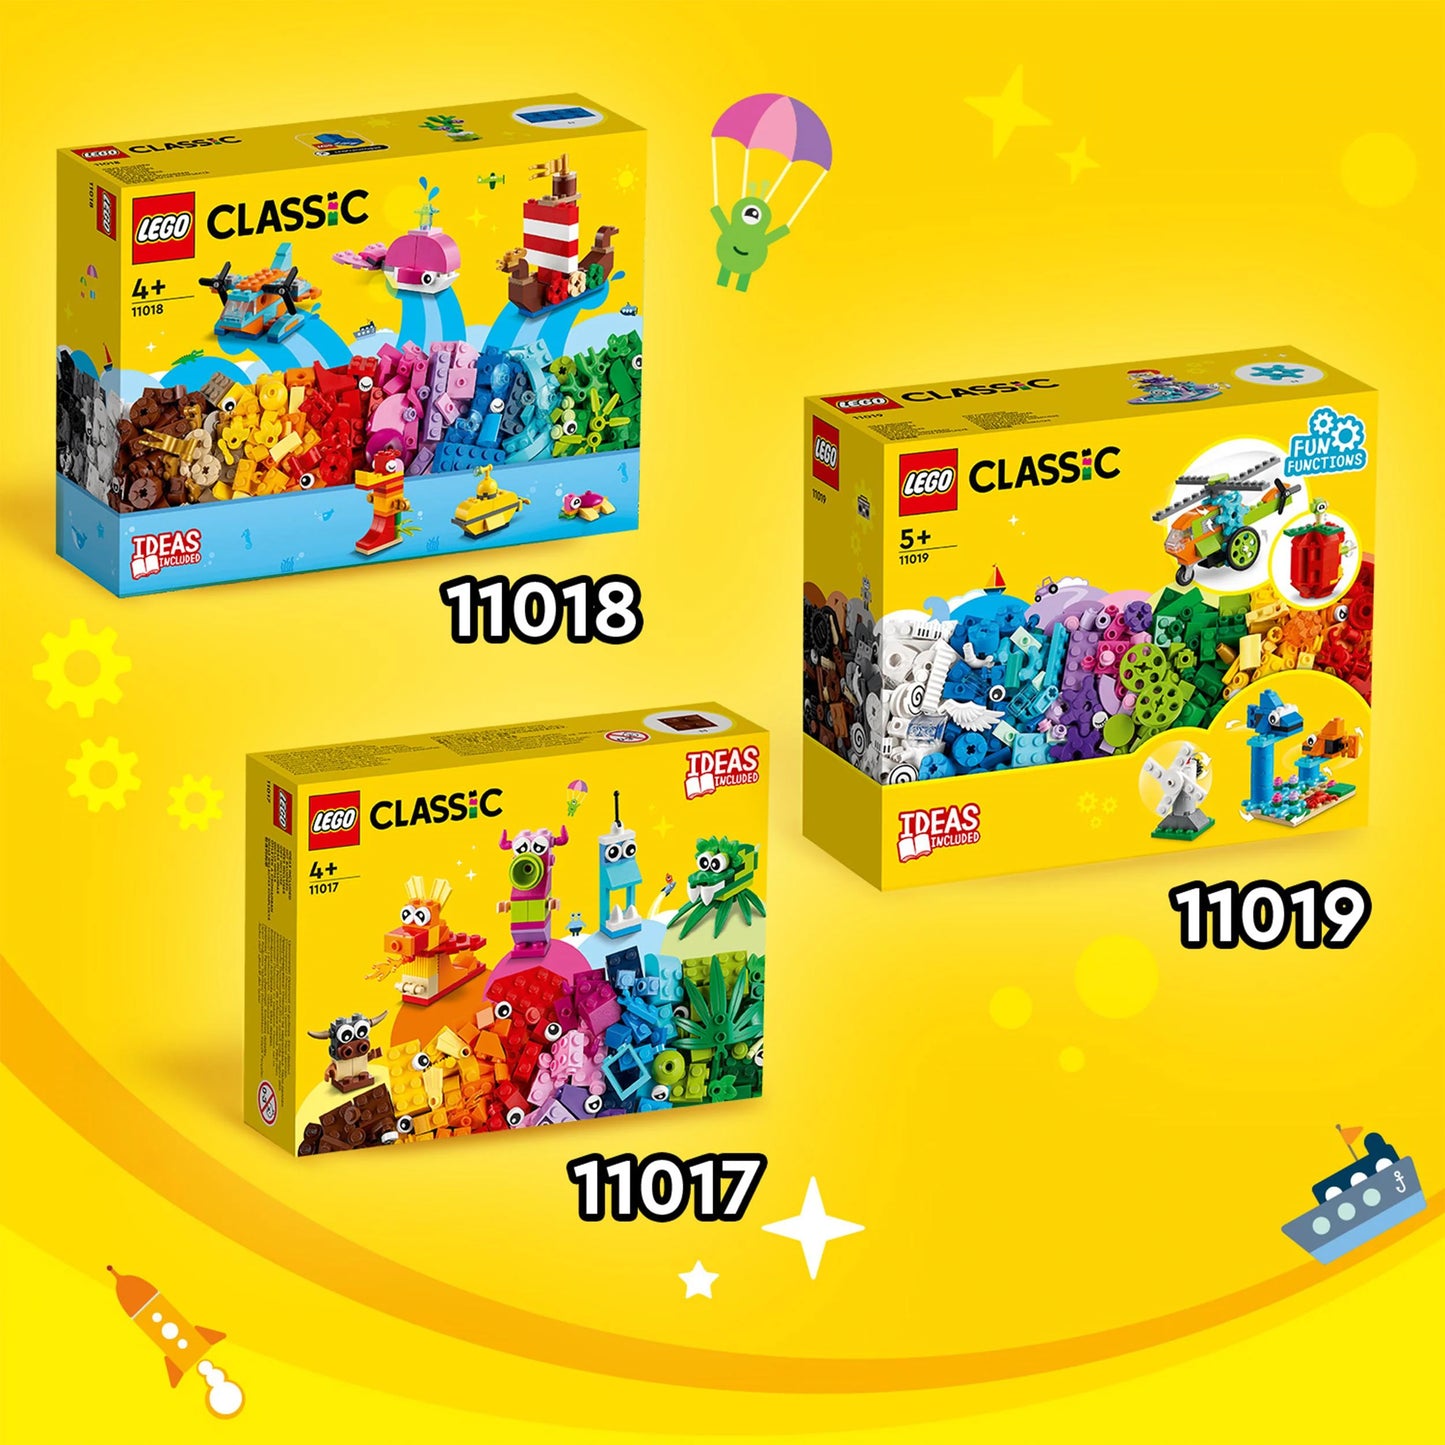 Bricks and Features - LEGO Classic